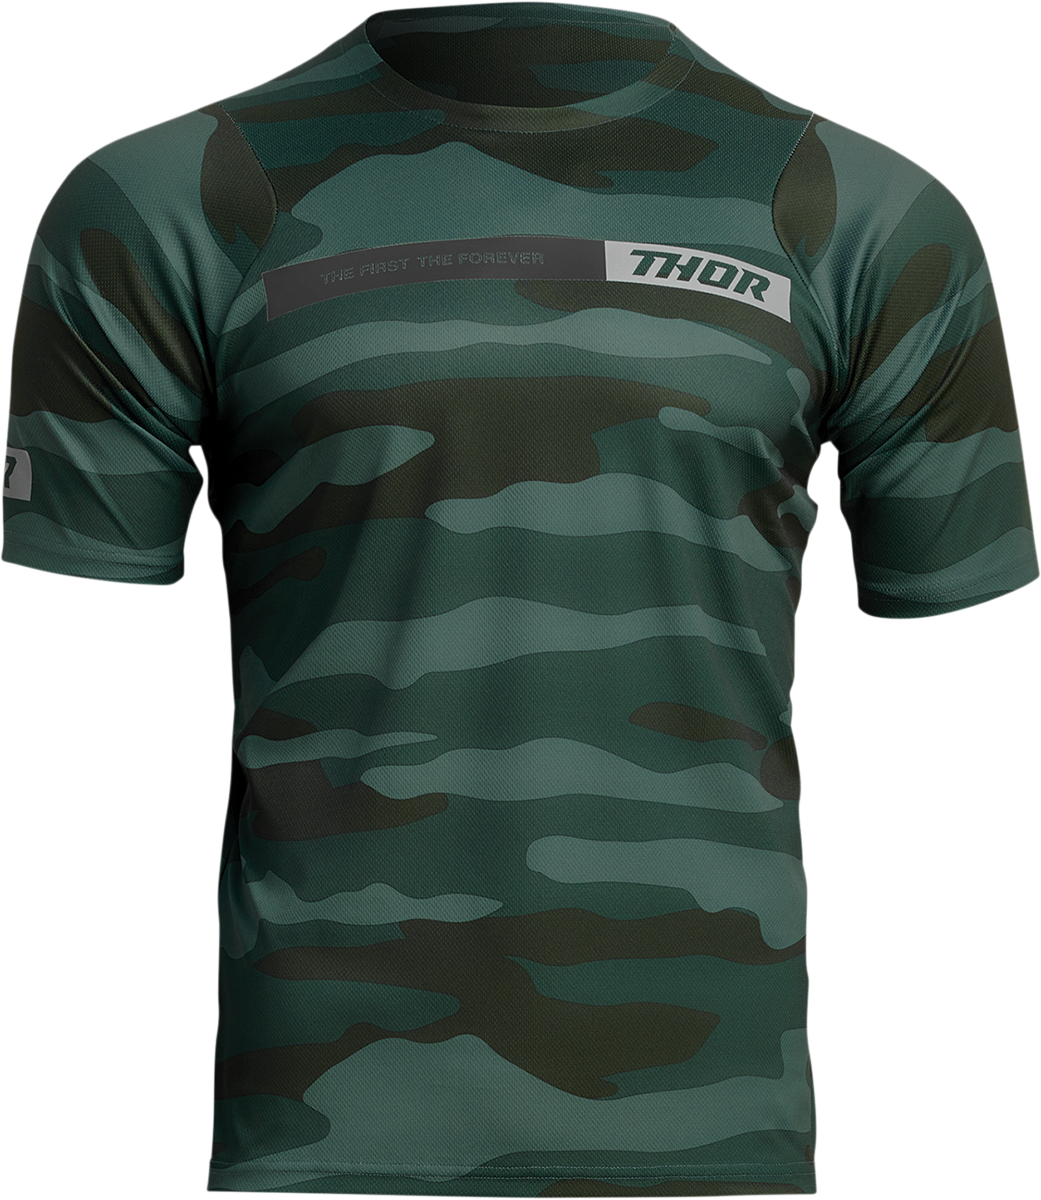 THOR Assist Jersey - Short-Sleeve - Camo Green - Large 5020-0022